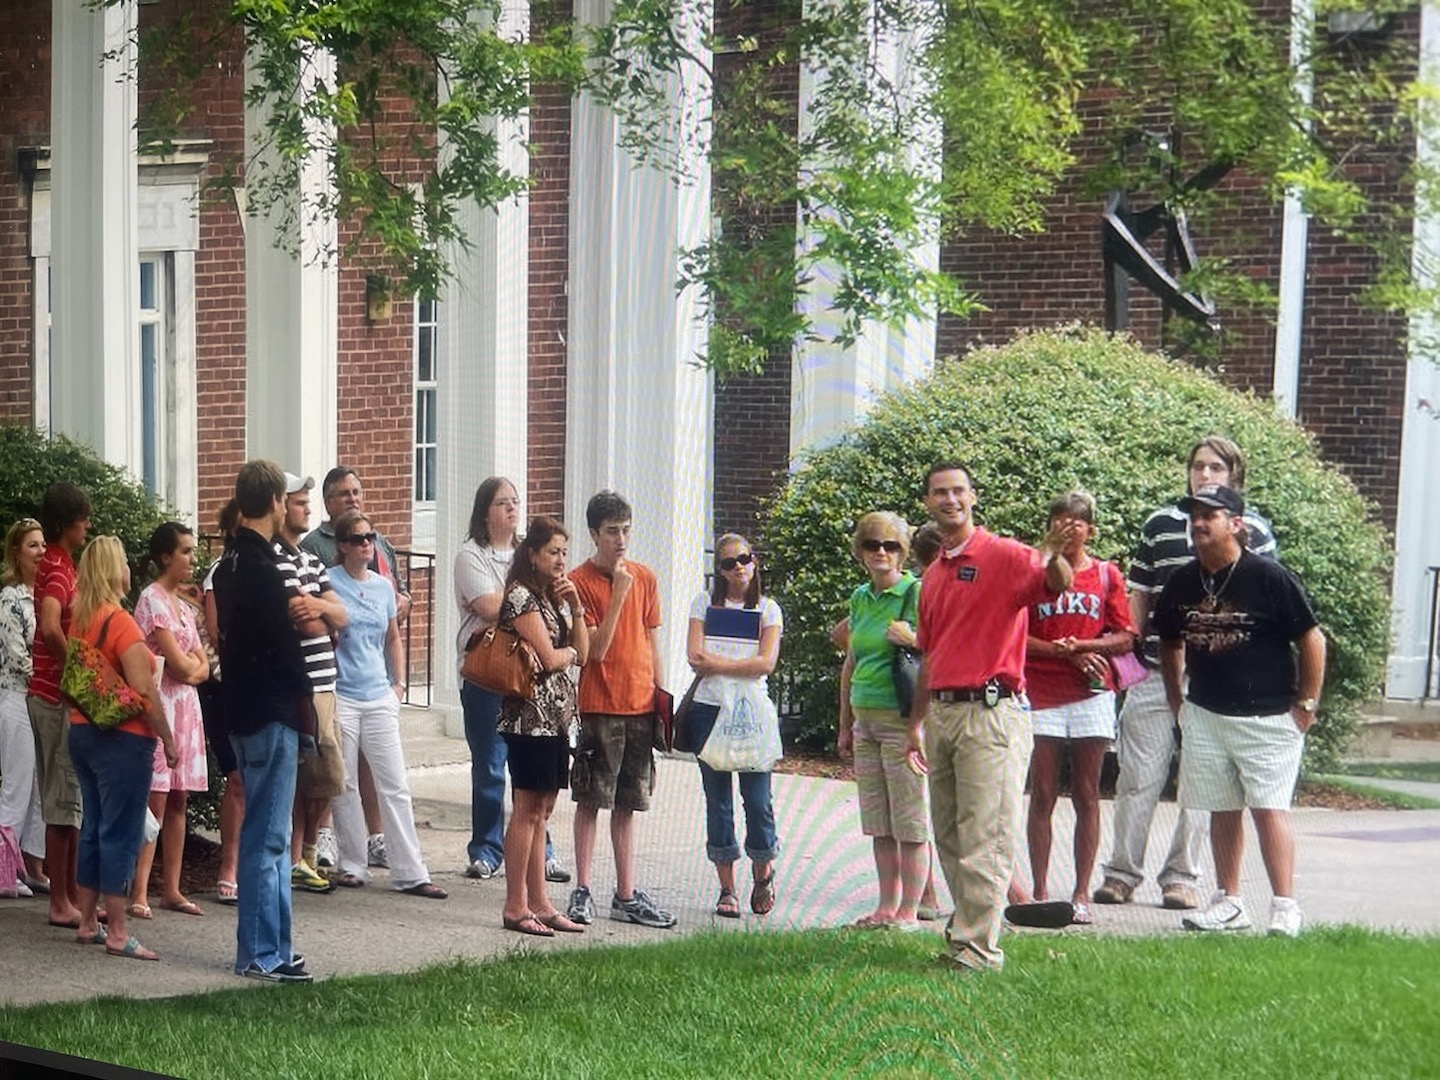 David leading a tour on campus